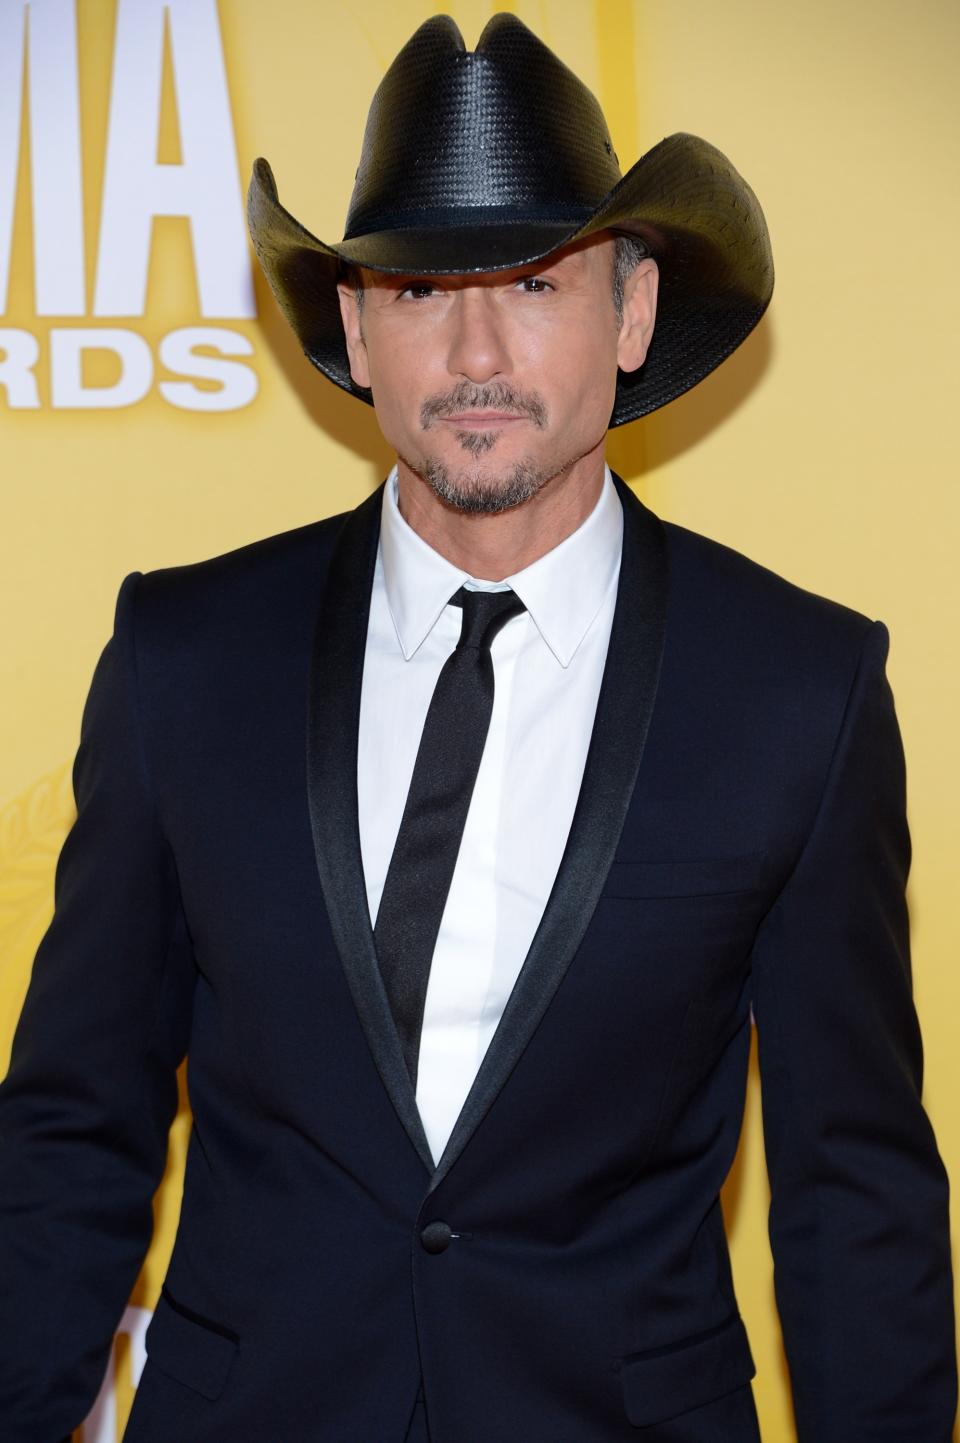 NASHVILLE, TN - NOVEMBER 01: Country music artist Tim McGraw attends the 46th annual CMA Awards at the Bridgestone Arena on November 1, 2012 in Nashville, Tennessee. (Photo by Jason Kempin/Getty Images)